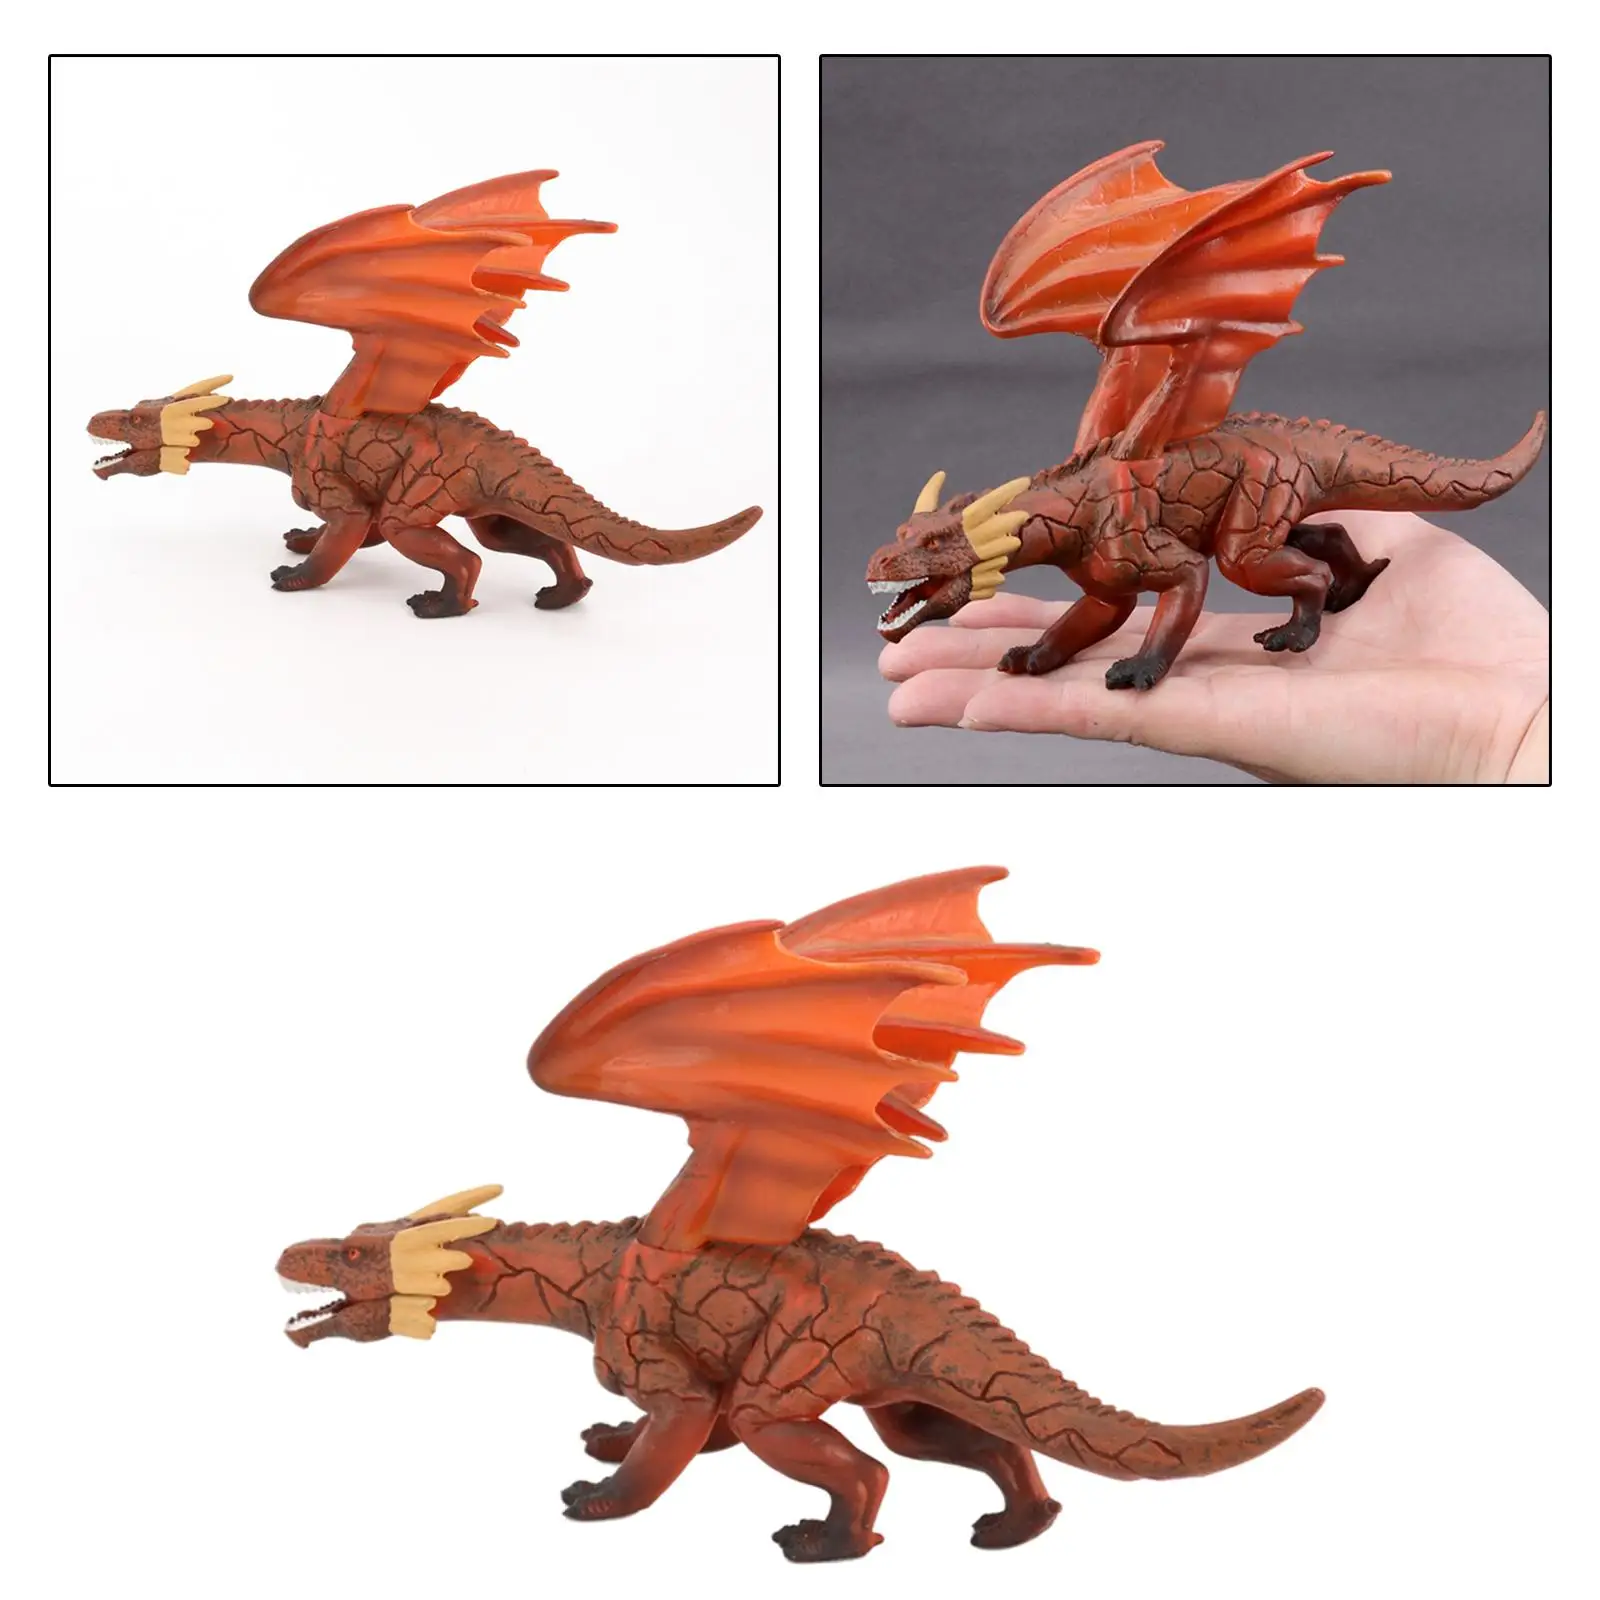 Simulated Dinosaur Figure Kids Educational Toys for Teens Adults Xmas Gifts